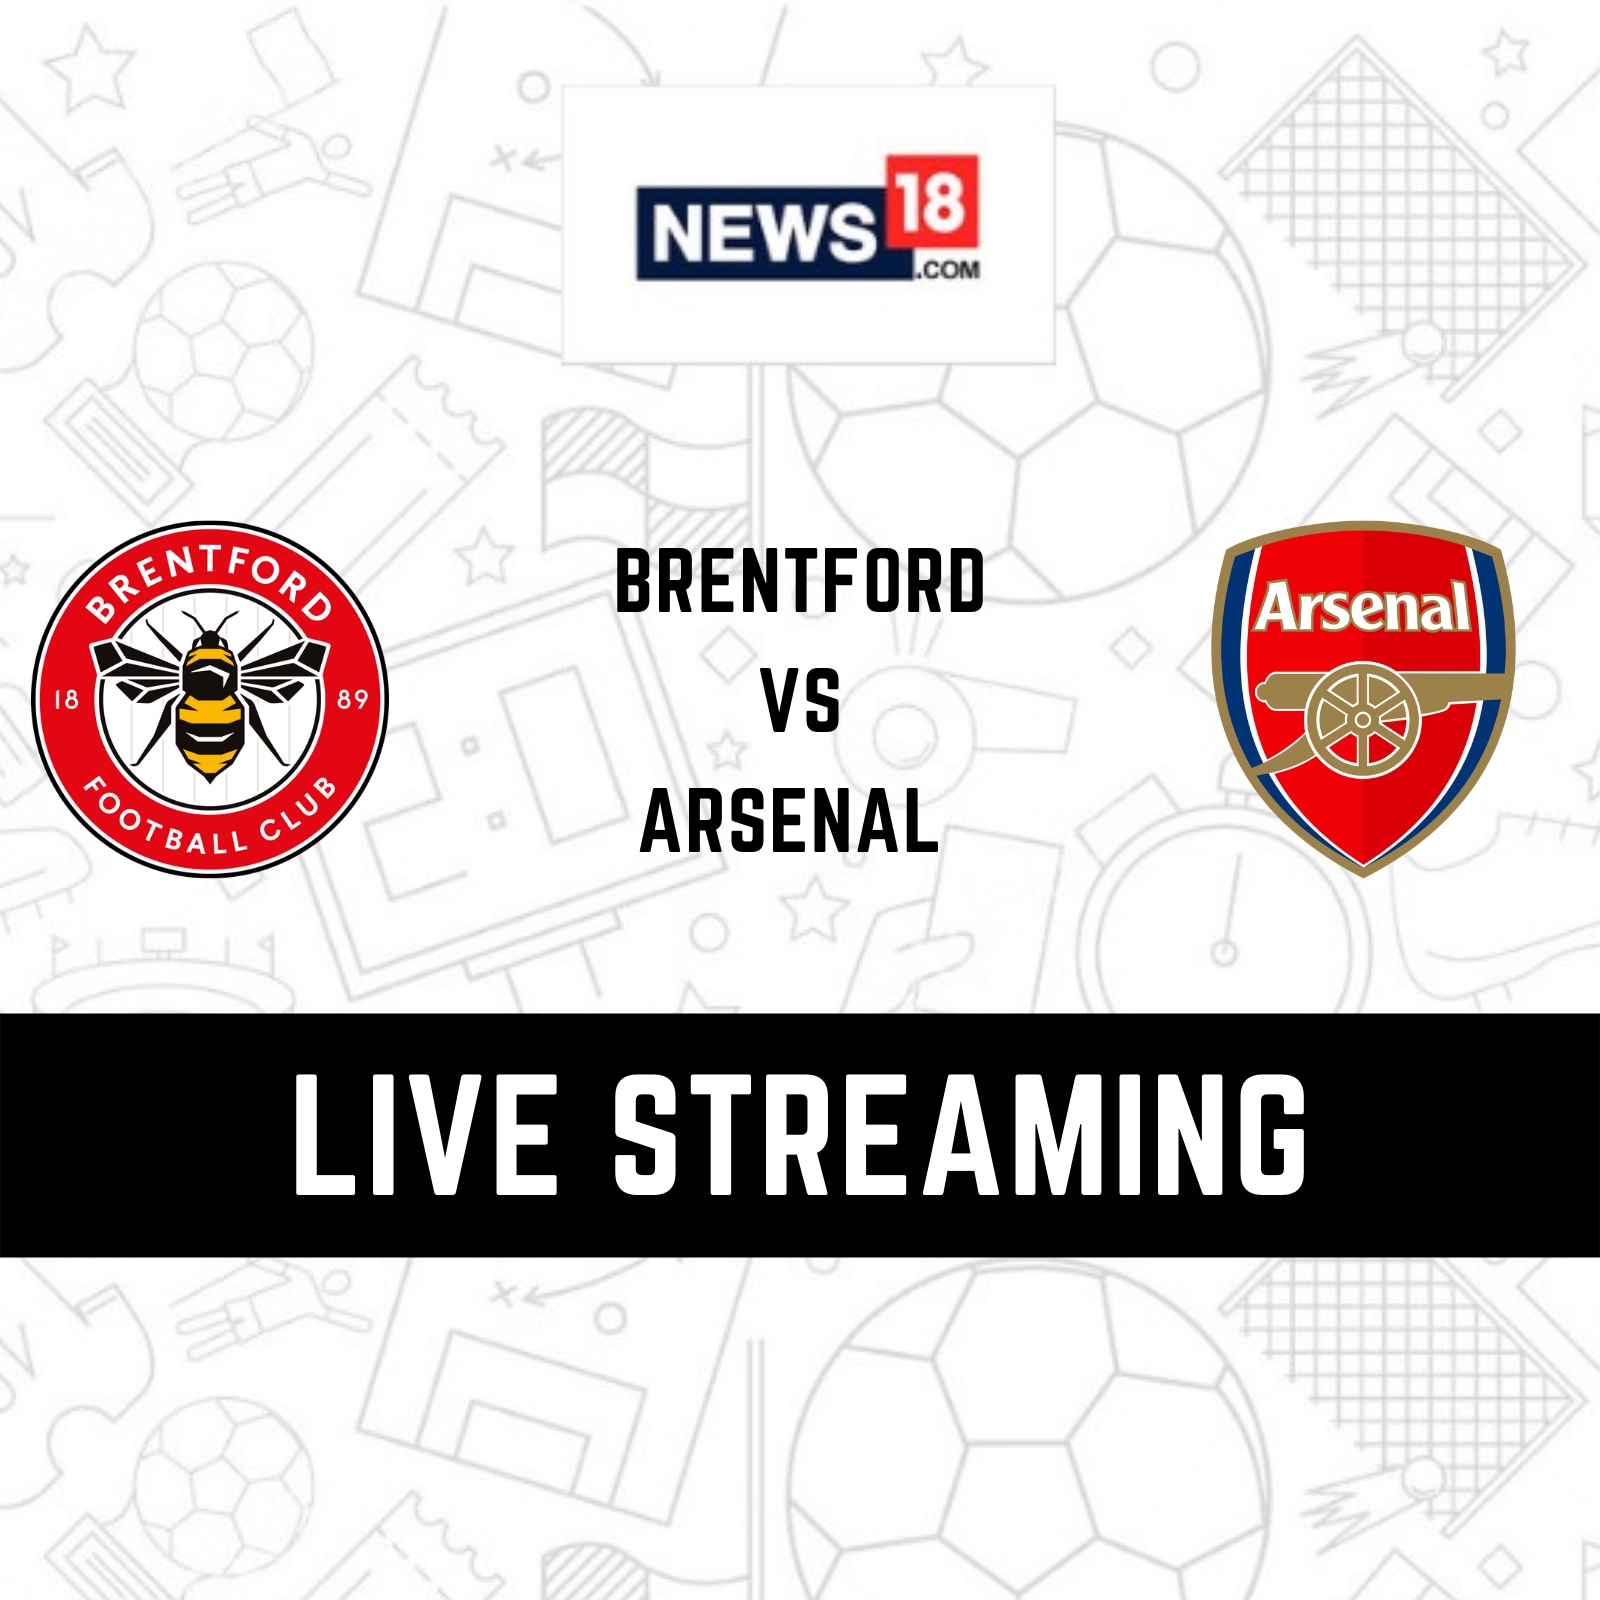 Brentford vs Arsenal Live Streaming When and Where to Watch Premier League 2022-23 Live Coverage on Live TV Online